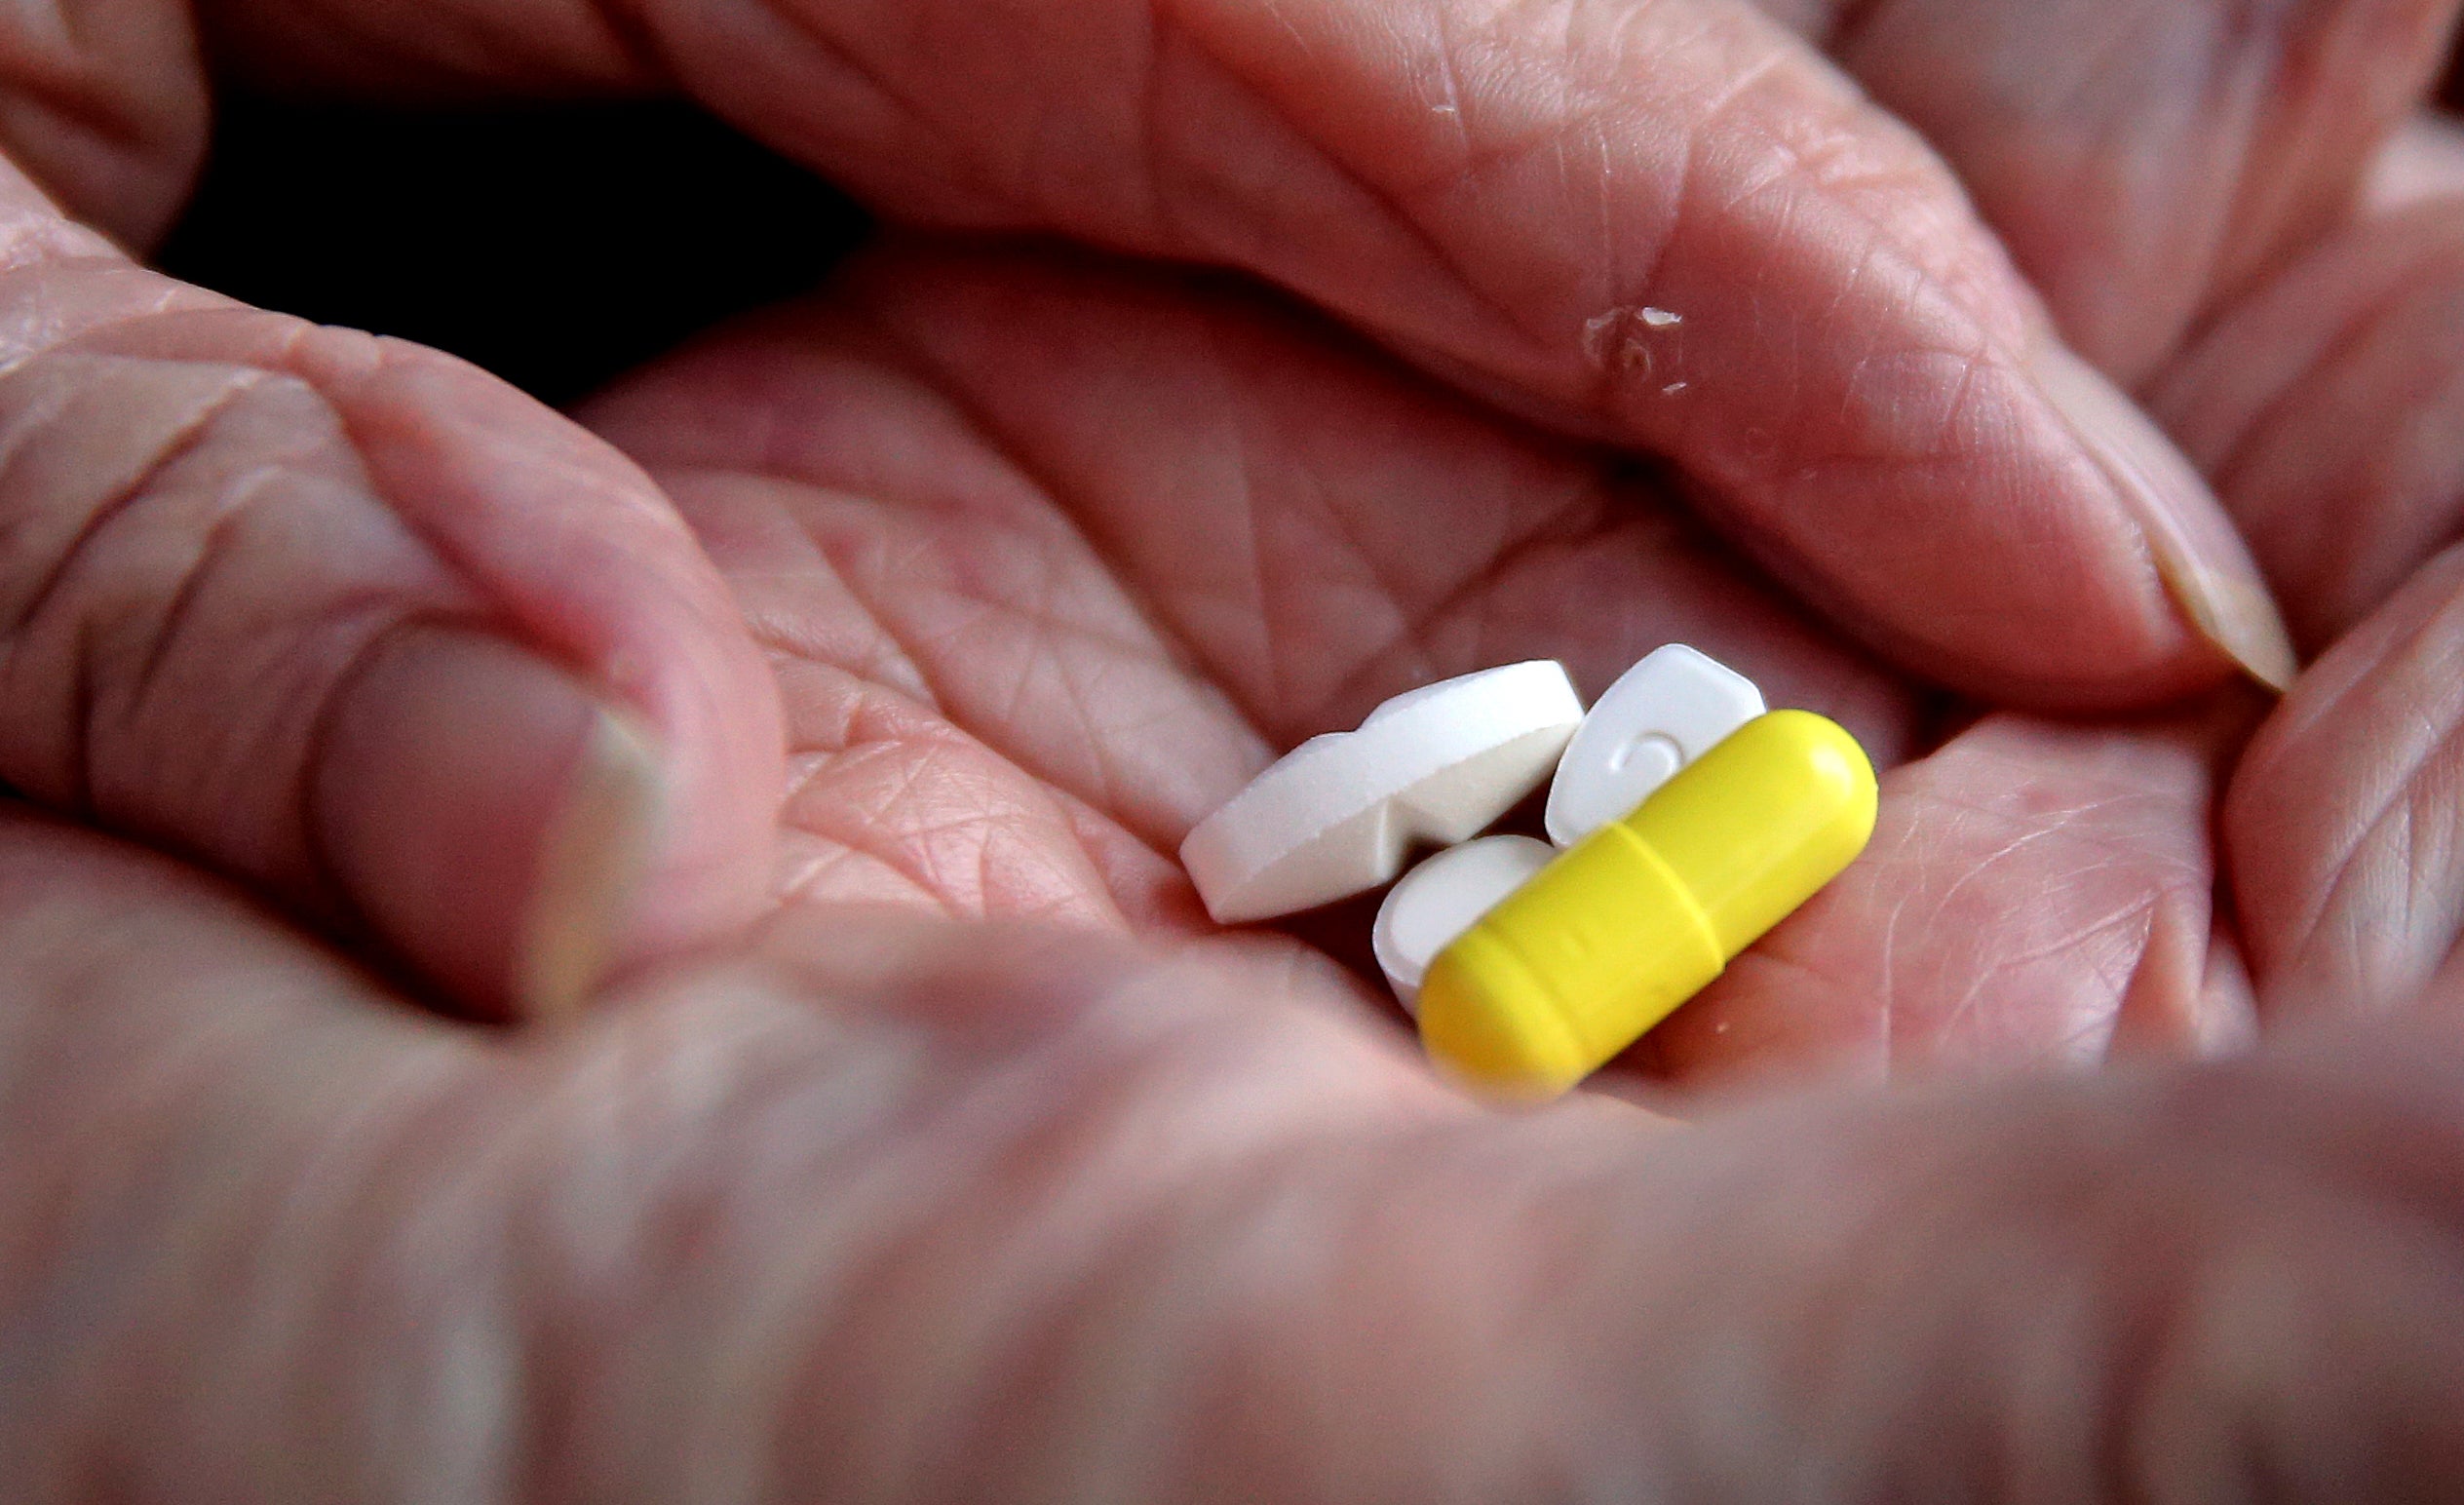 The CMA has imposed over £100 million in fines after Advanz inflated the price of thyroid tablets, causing the NHS and patients to lose out. File image. (Peter Byrne/PA)